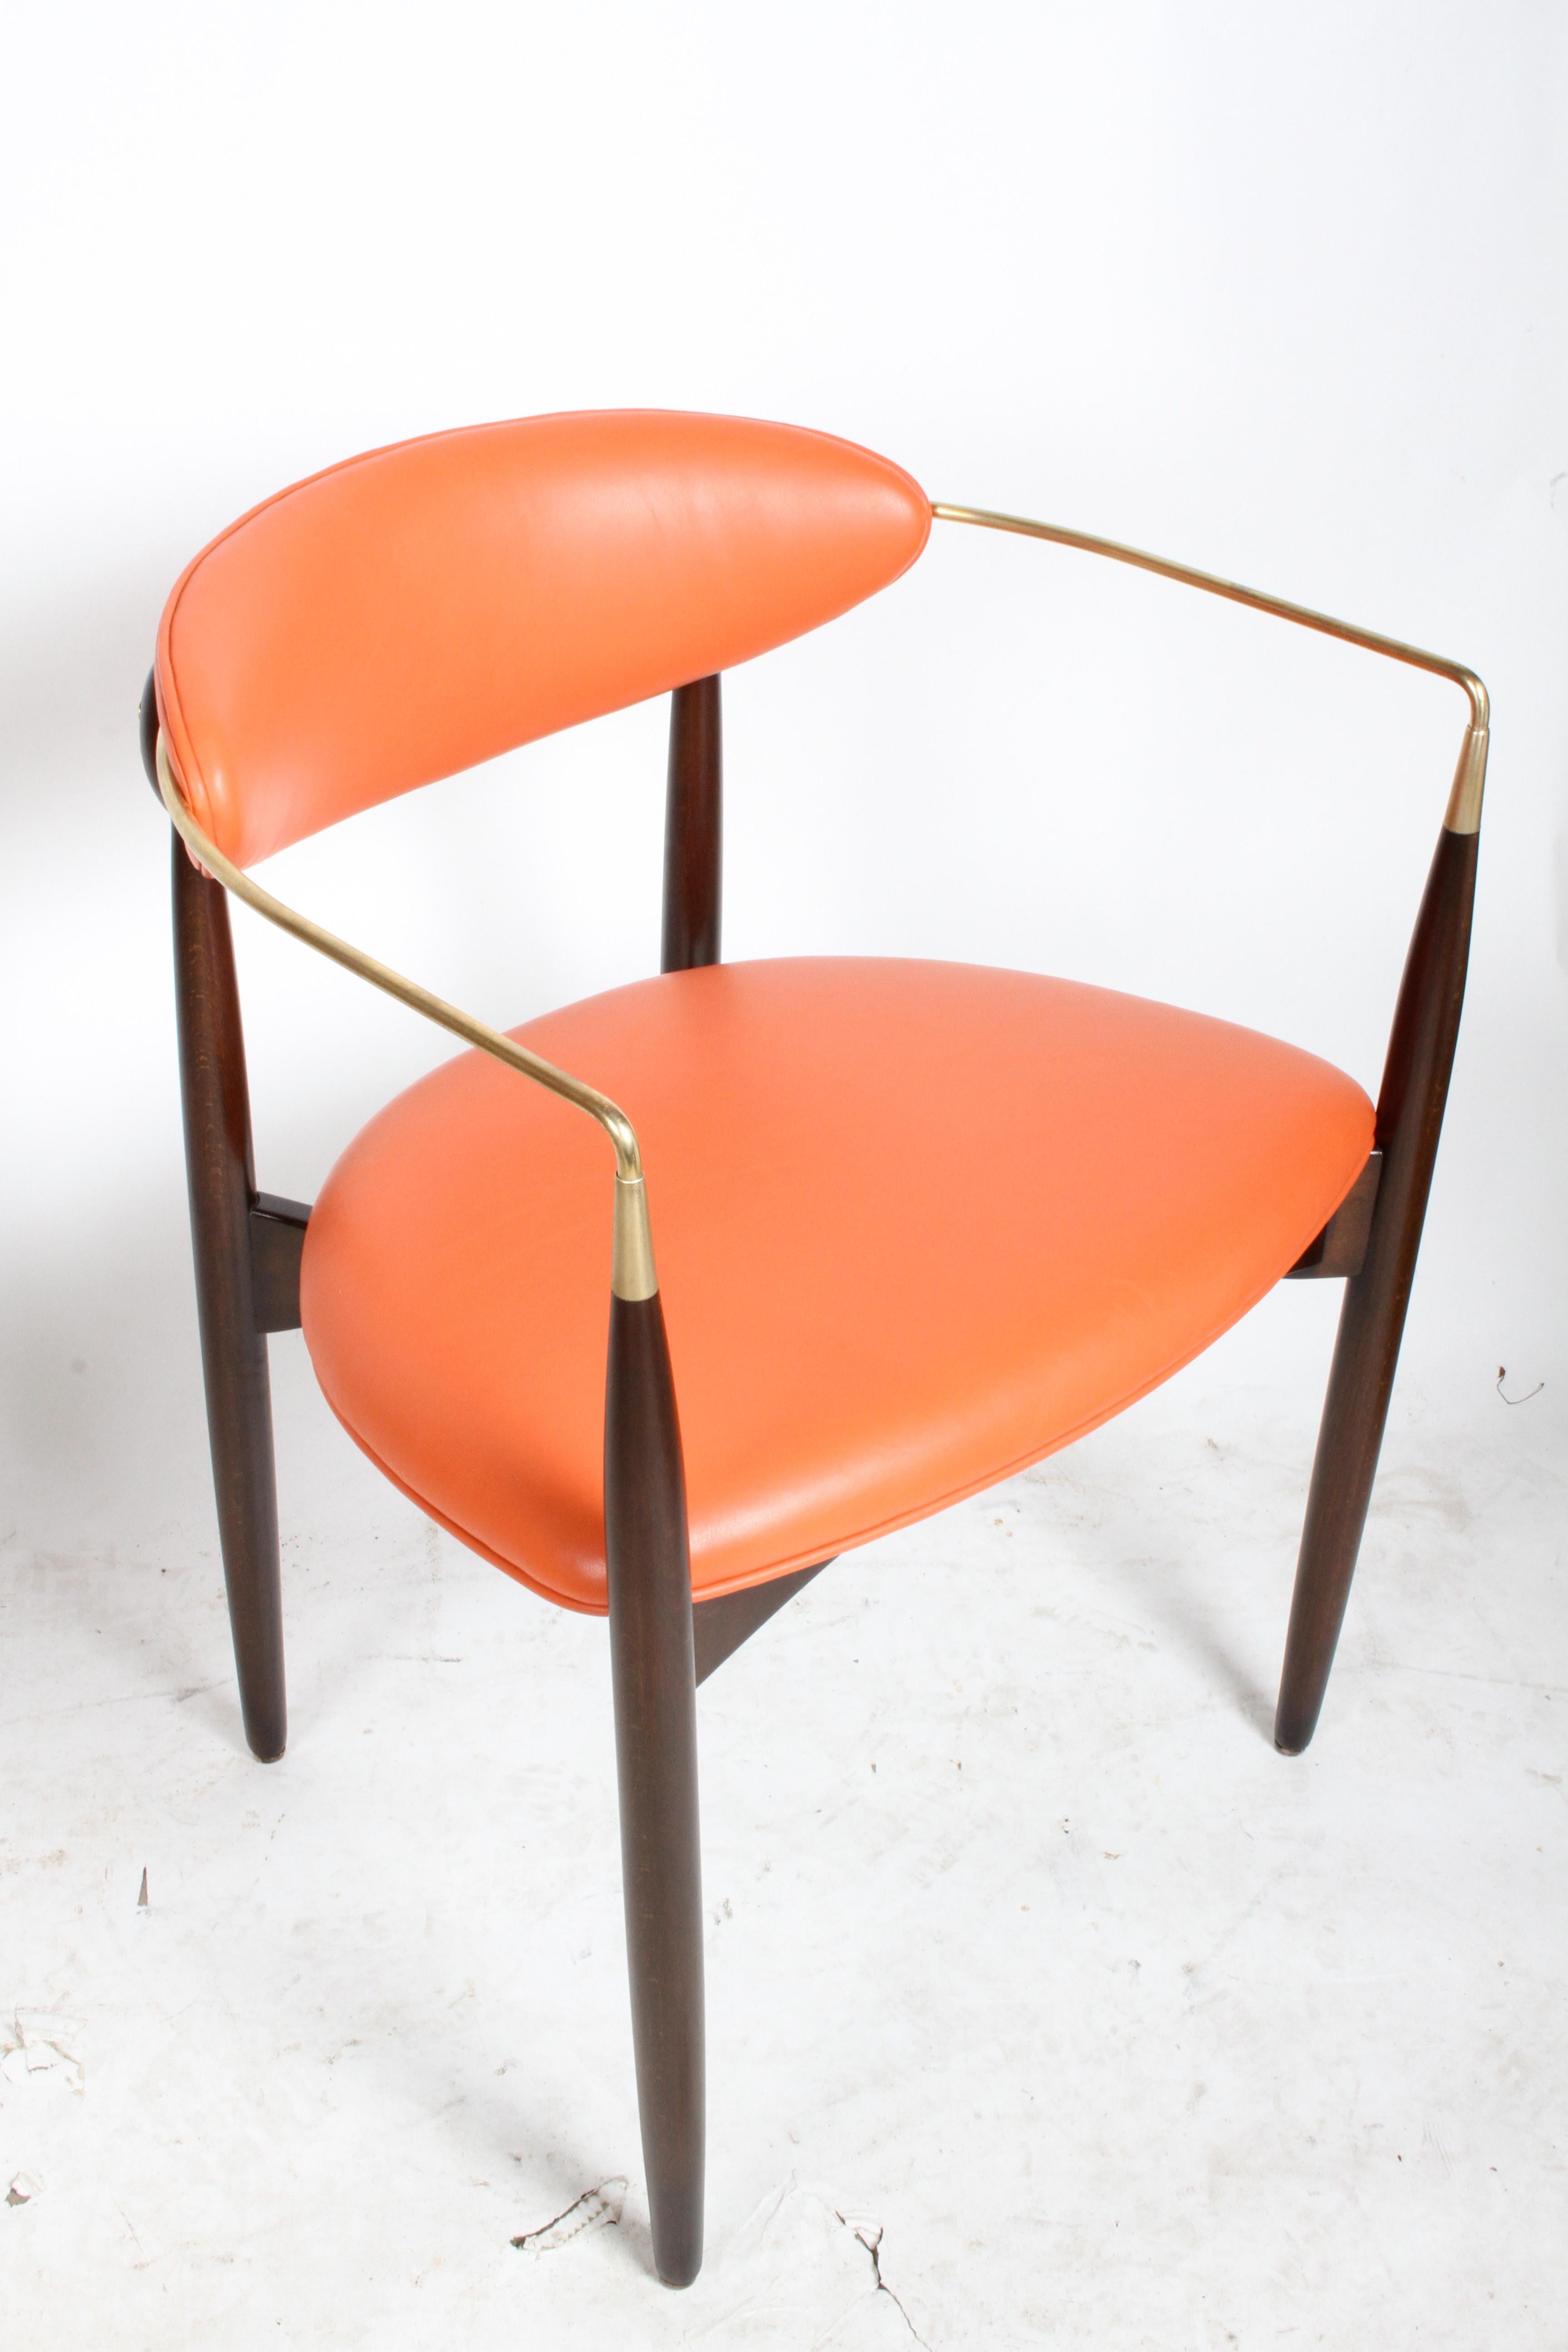 Completely Restored Dan Johnson for Viscount Mid-Century Brass Armchair 1950s For Sale 2